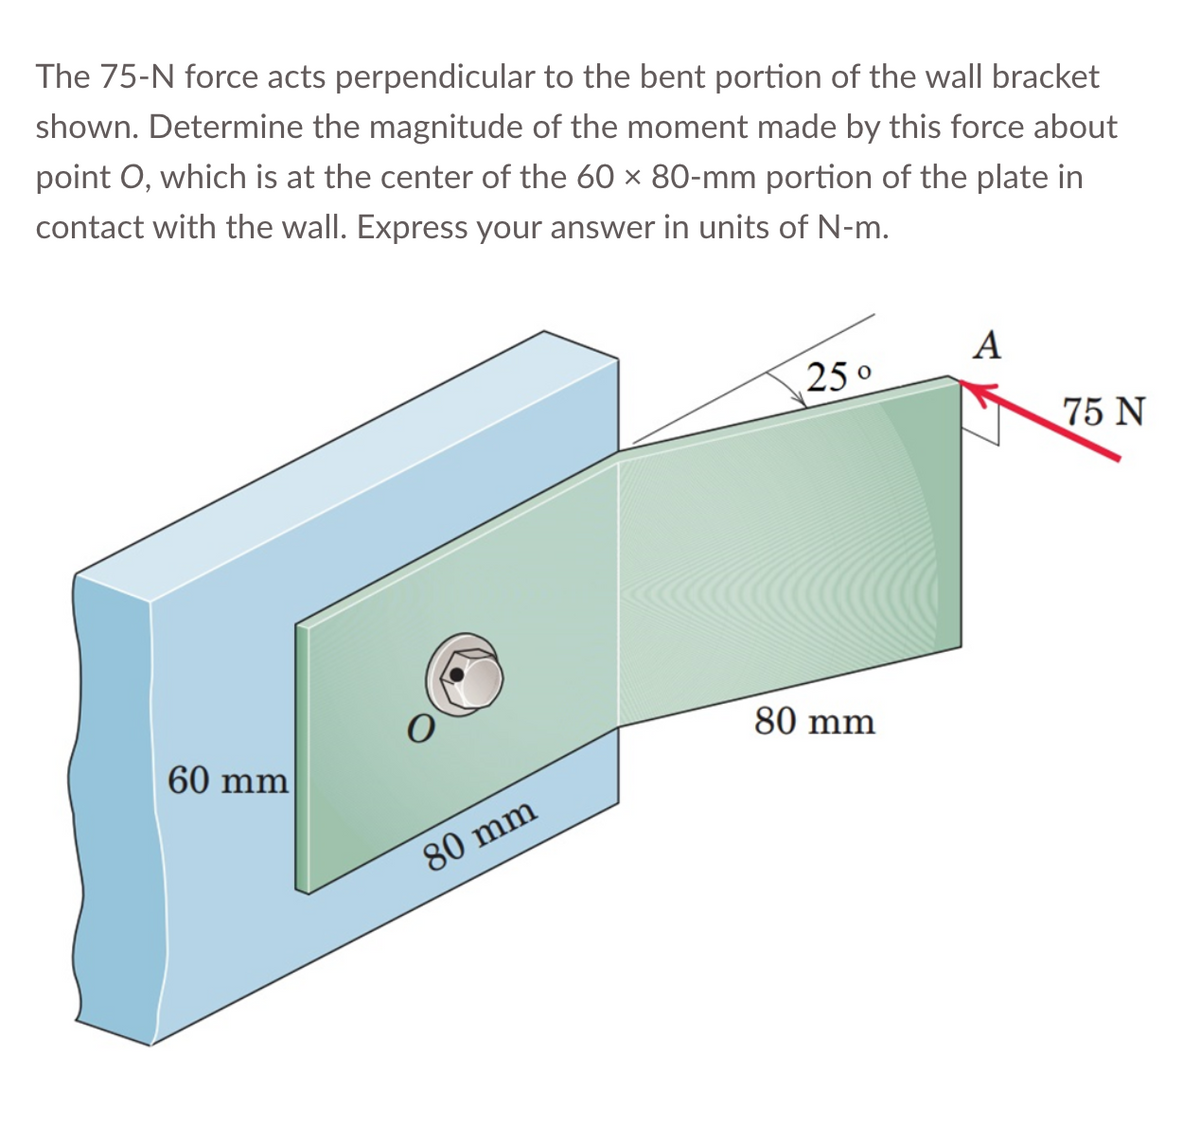 The 75-N force acts perpendicular to the bent portion of the wall bracket
shown. Determine the magnitude of the moment made by this force about
point O, which is at the center of the 60 x 80-mm portion of the plate in
contact with the wall. Express your answer in units of N-m.
60 mm
80 mm
25°
80 mm
A
75 N